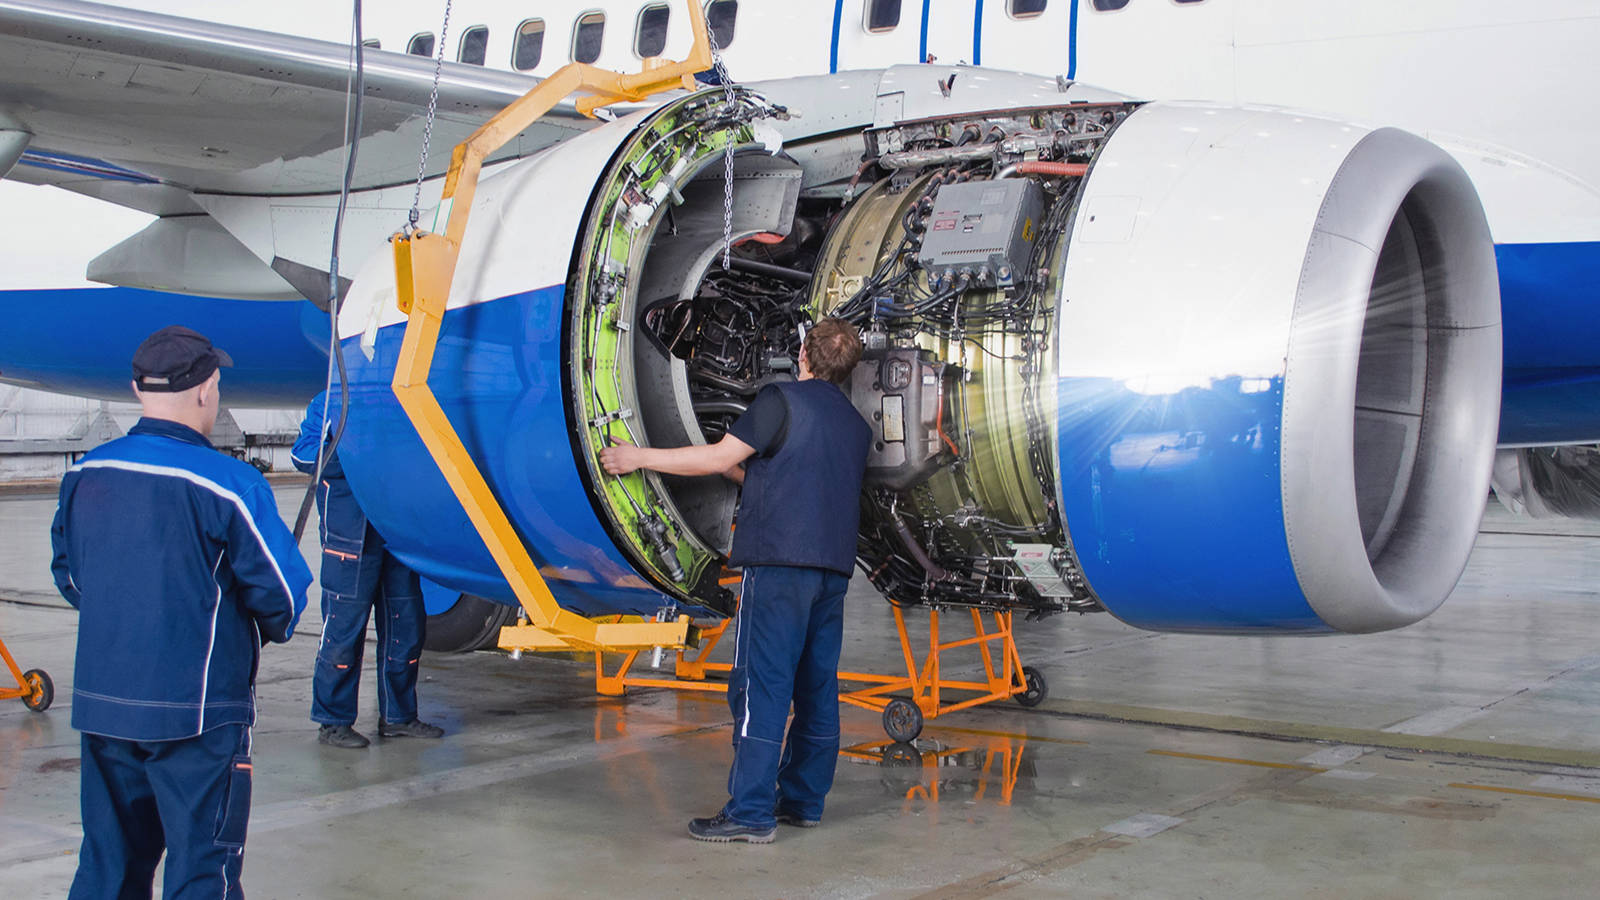 Two workers replacing an airplane engine with a device that required careful tool building measurement